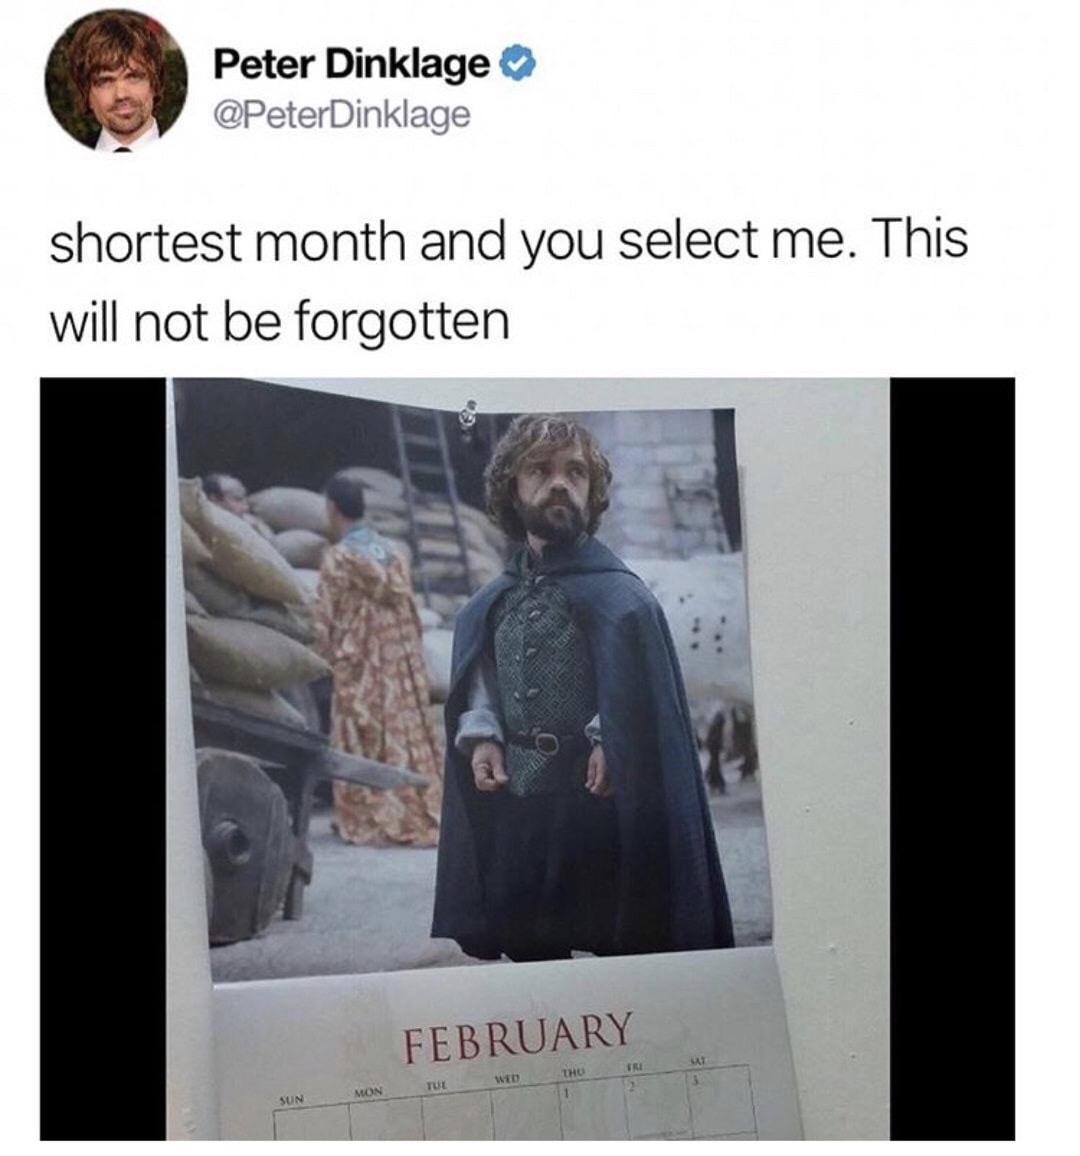 dank meme shortest month and you select me - Peter Dinklage Dinklage shortest month and you select me. This will not be forgotten February